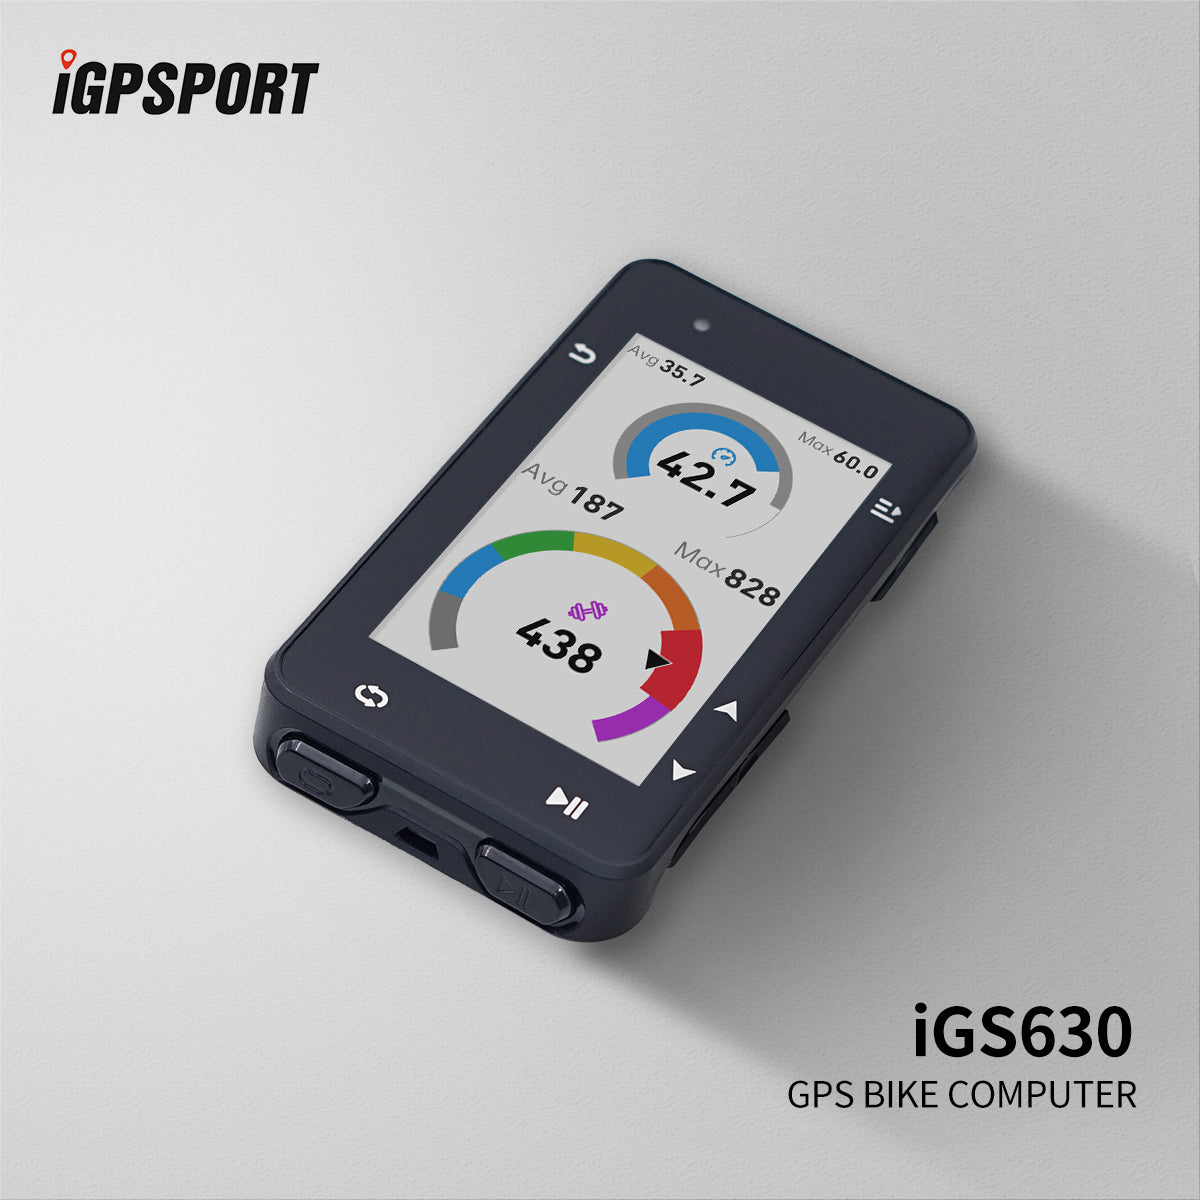 Igpsport iGS630 Cycling Computer